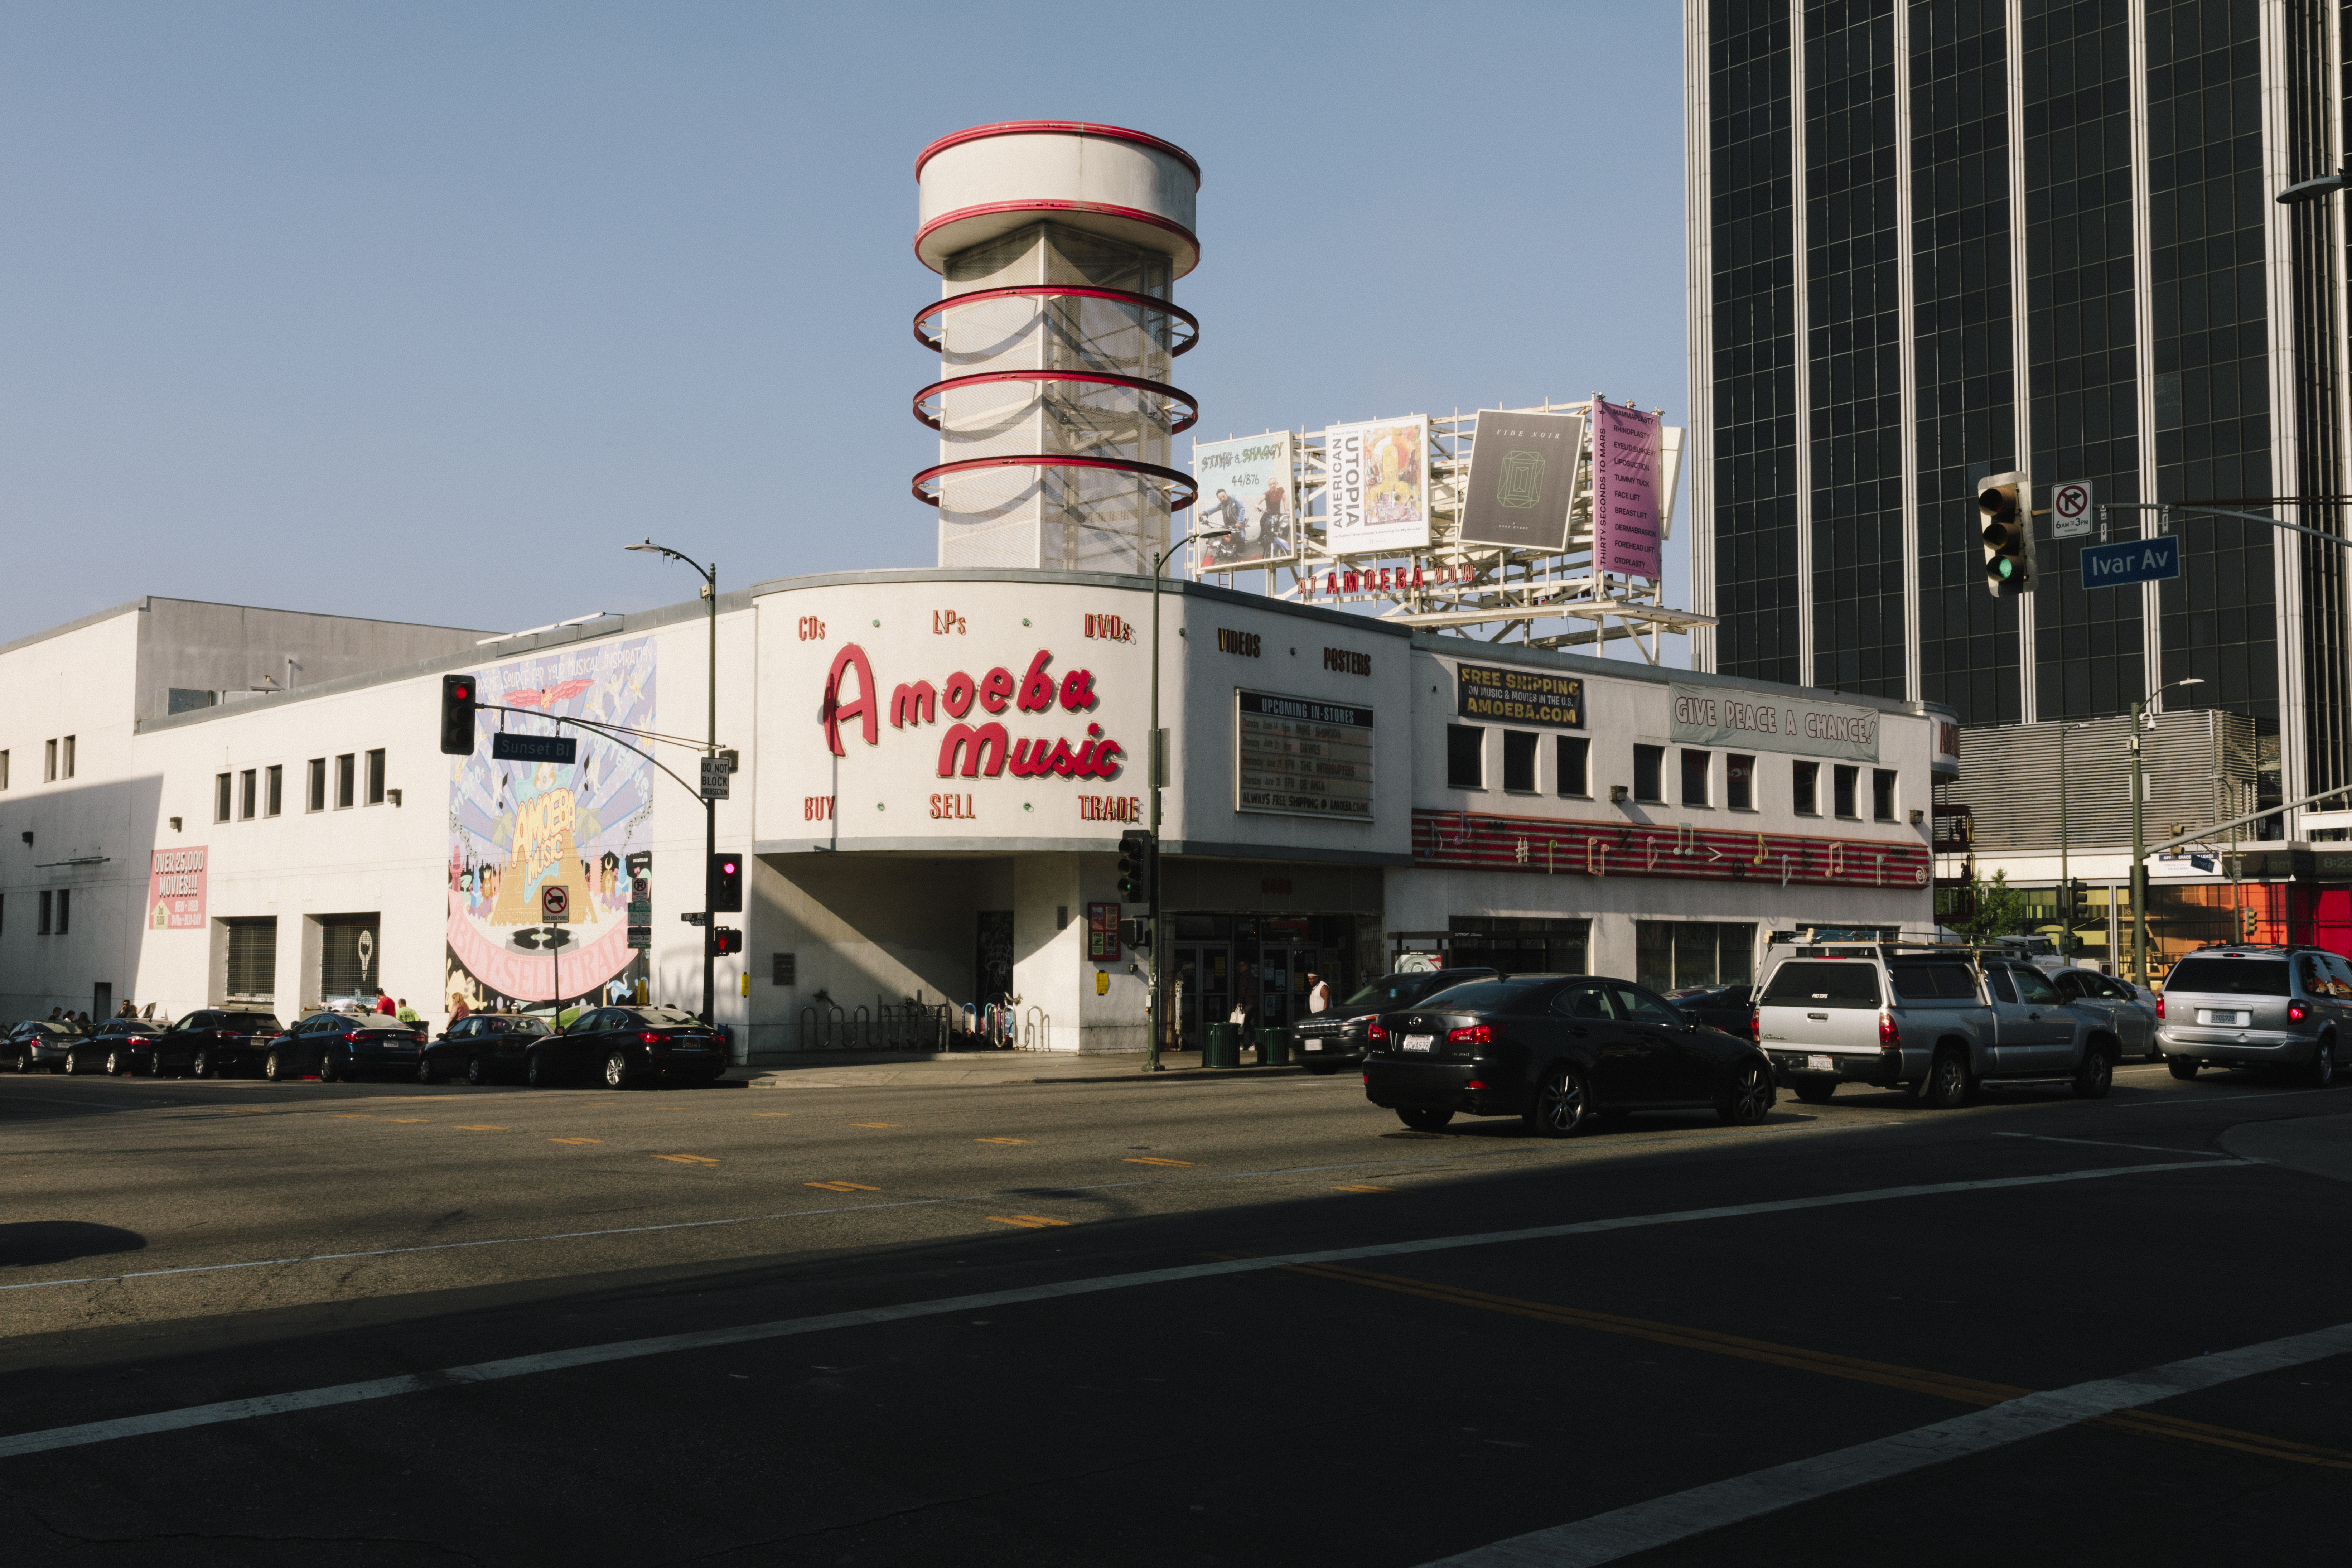 A photo of a low-rise, white, stucco building with exterior murals and neon signs, including one that says “Amoeba Records” in red letters on the front.